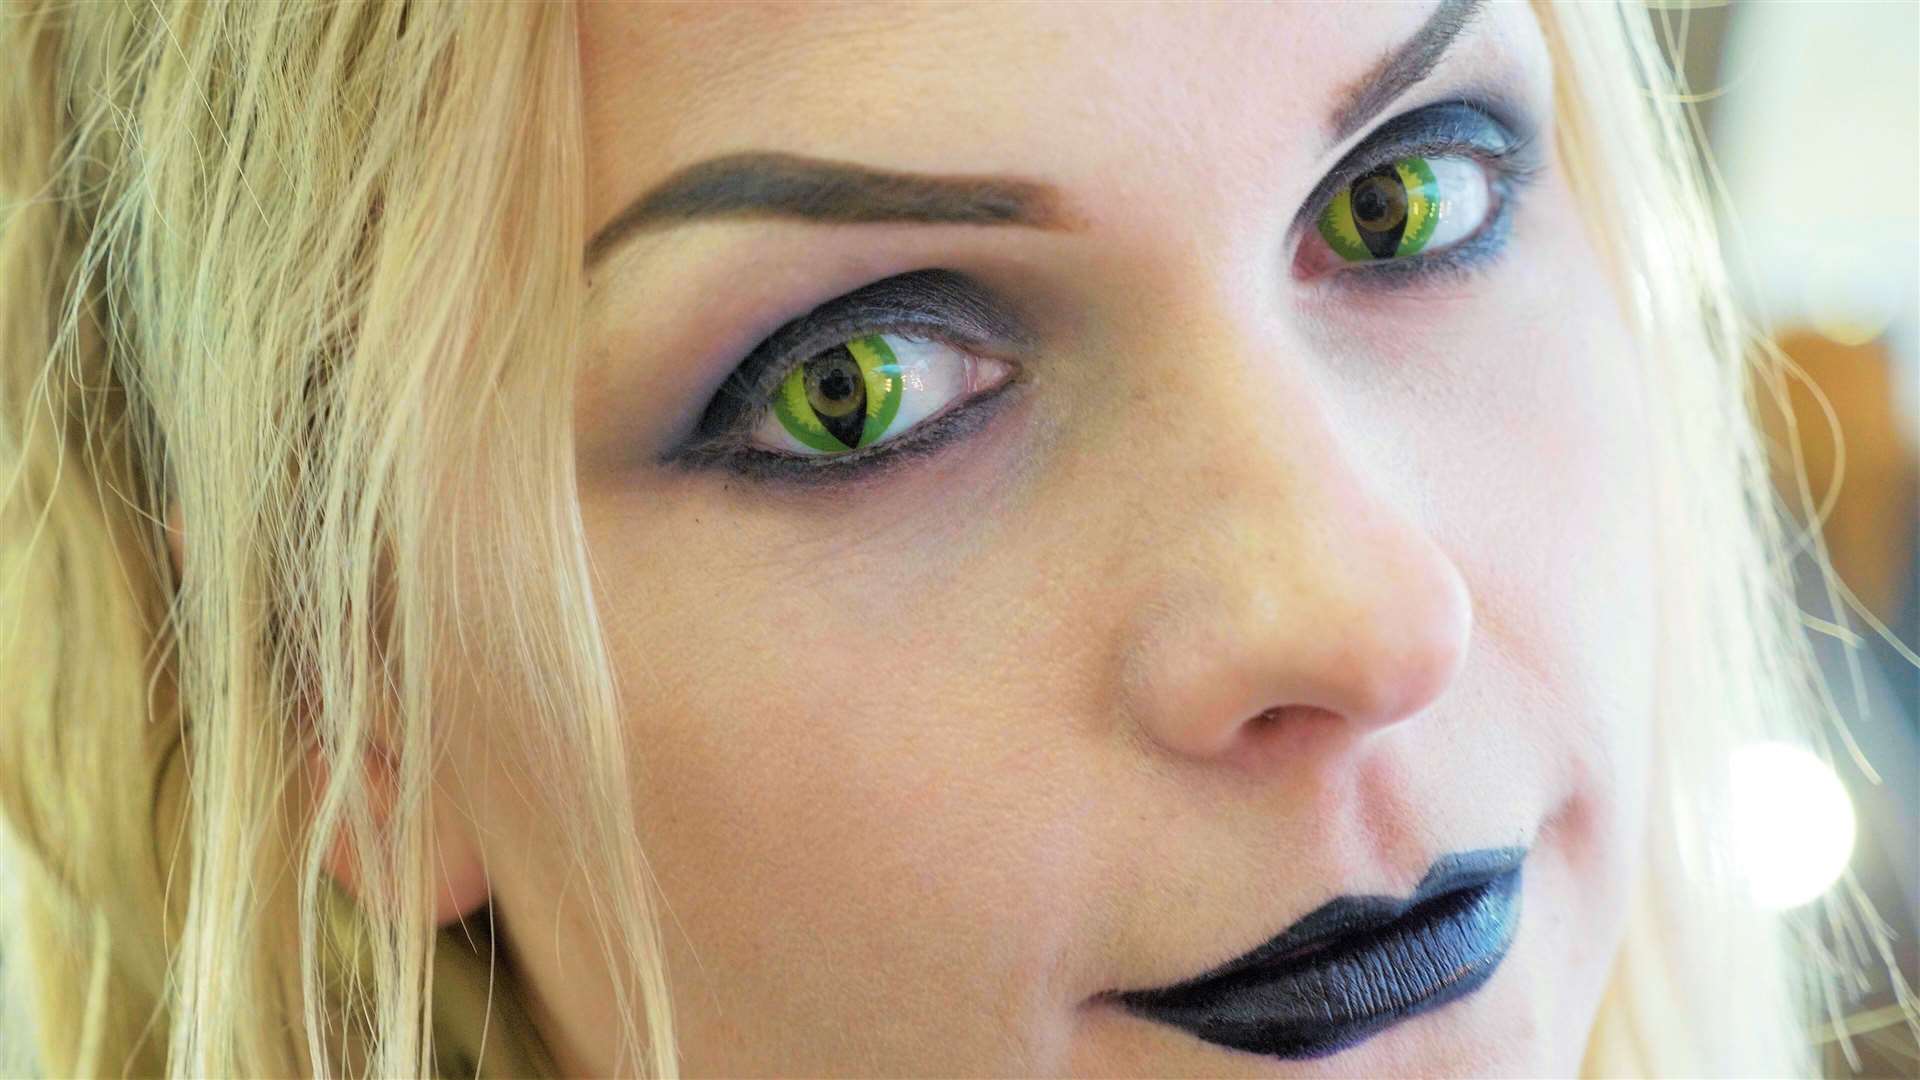 Cat eyes contact lenses have become popular with Halloween revellers.